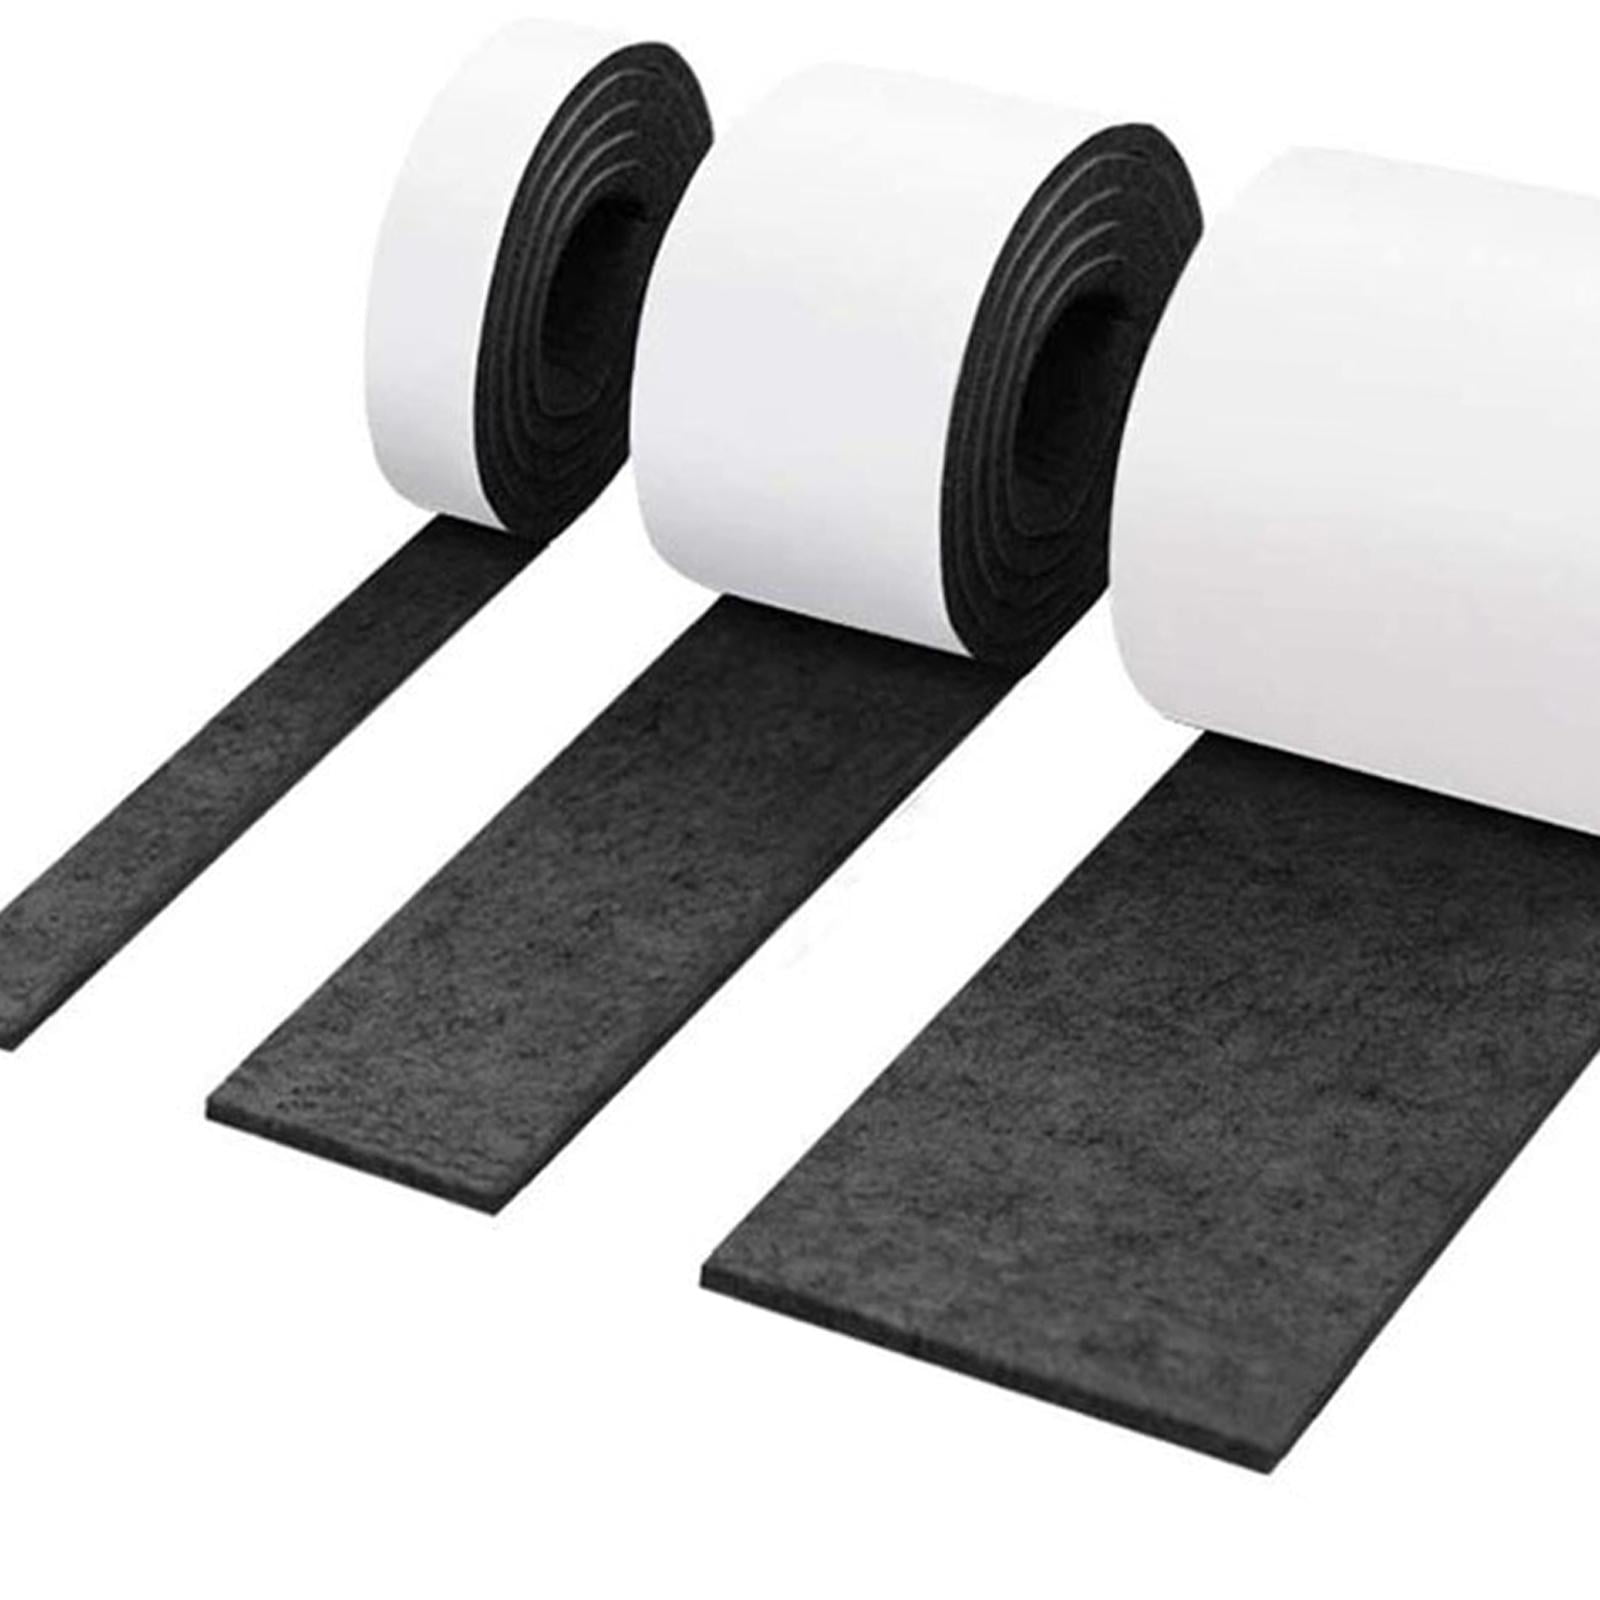 Black Felt Stripping, Adhesive Backed 1 Wide x 2mm (.078”) Thick, 50' Roll  - 3 Roll Minimum - The Felt Company